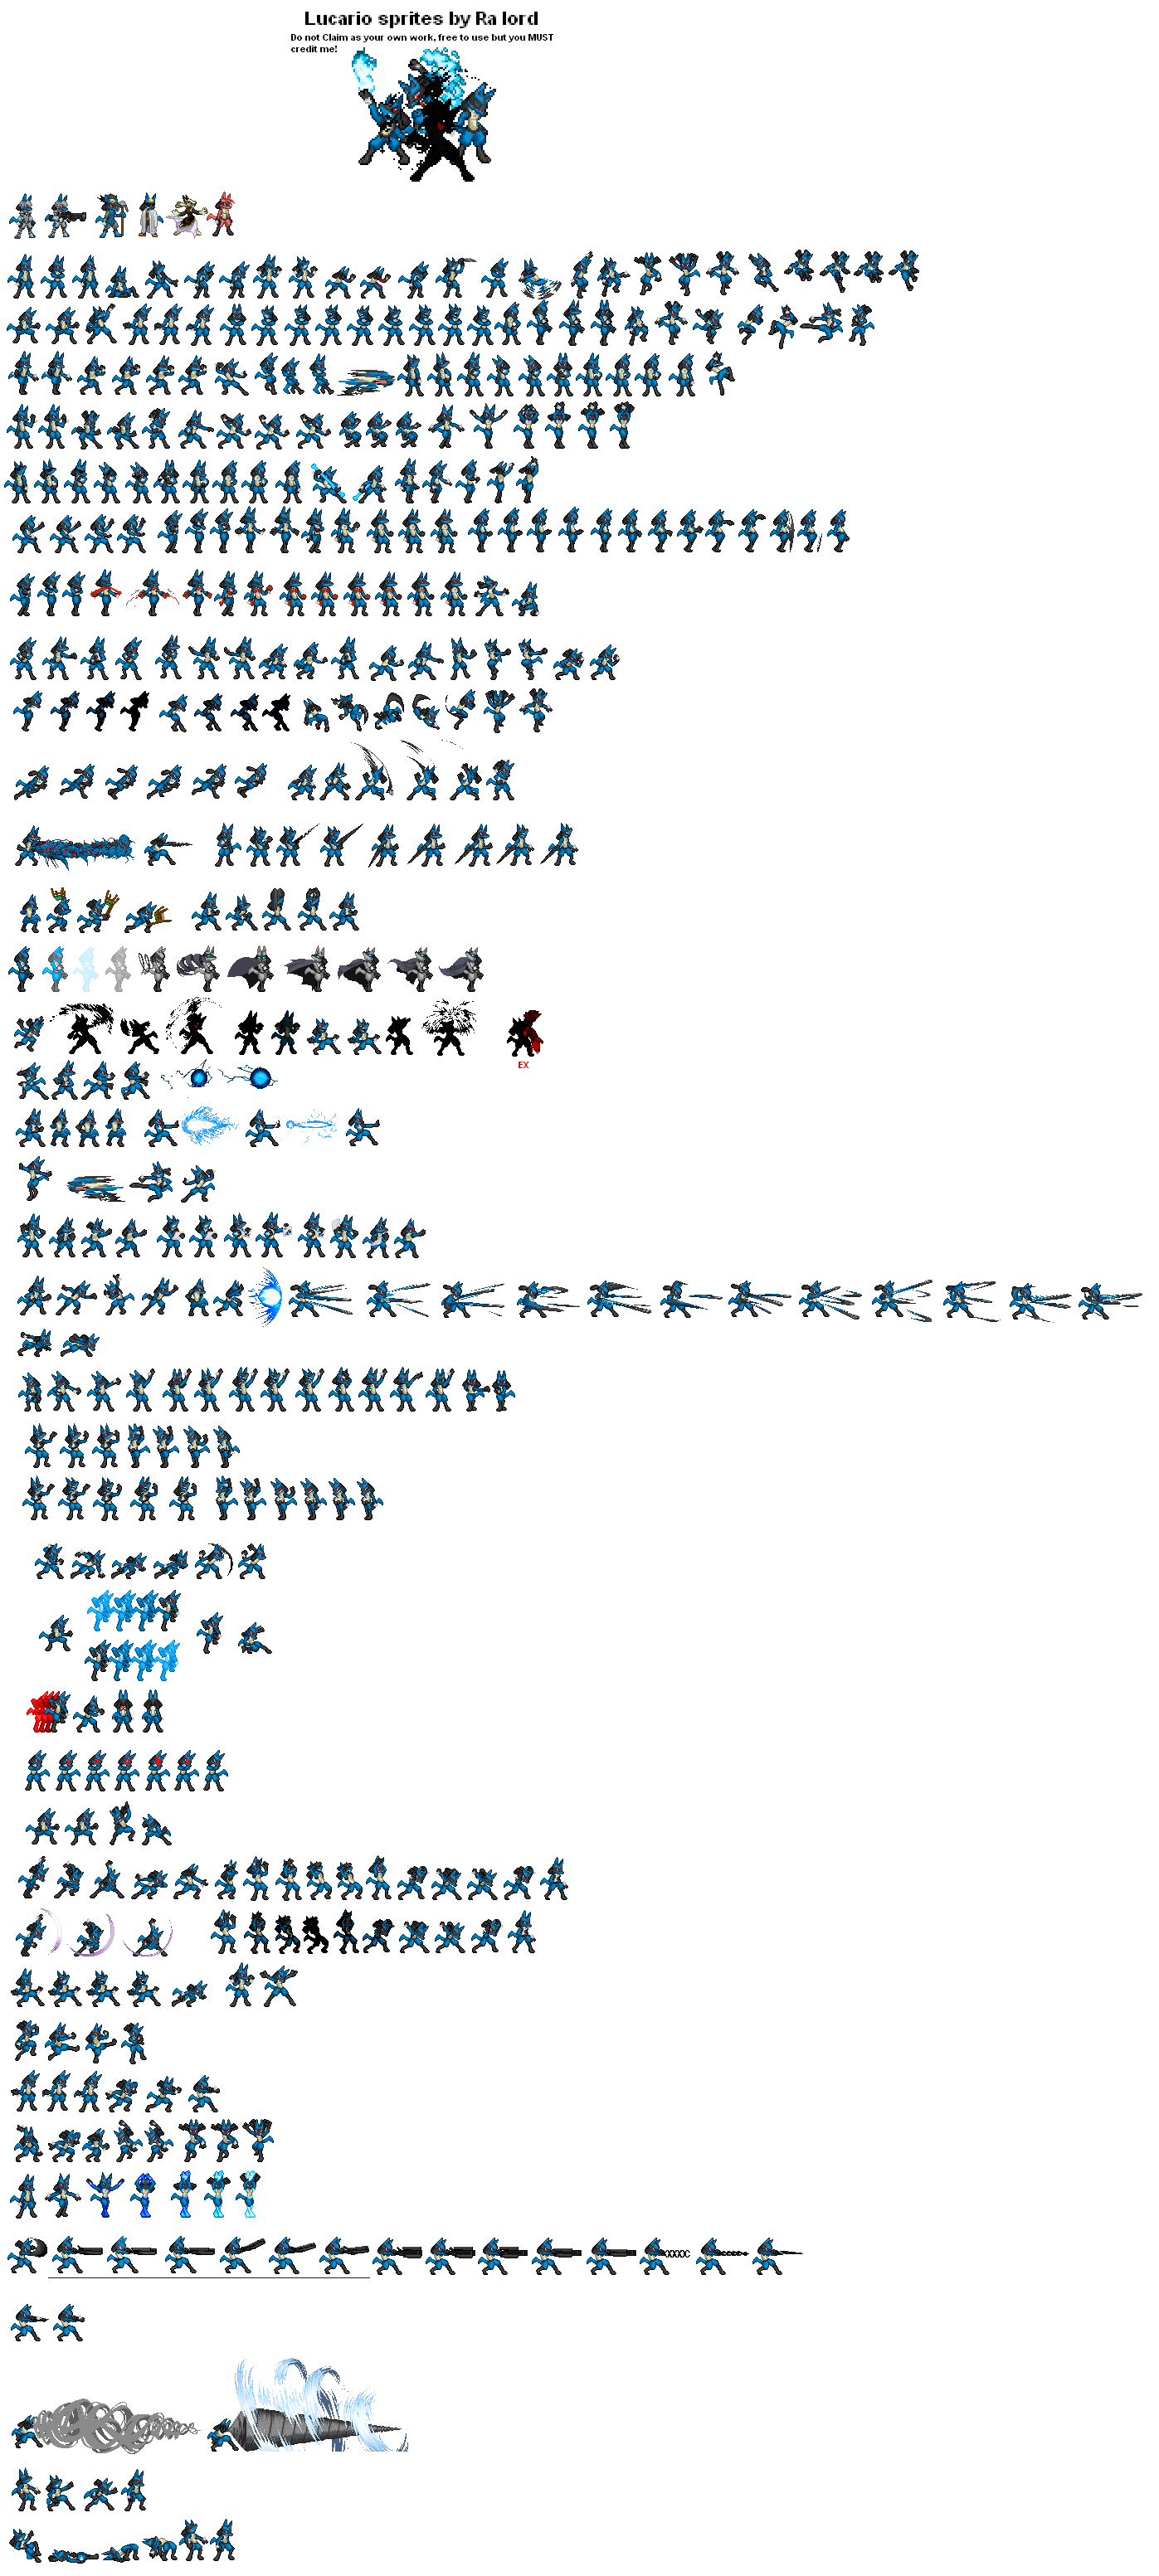 Lucario_Sprite_sheet_Update_4_by_ralord.png